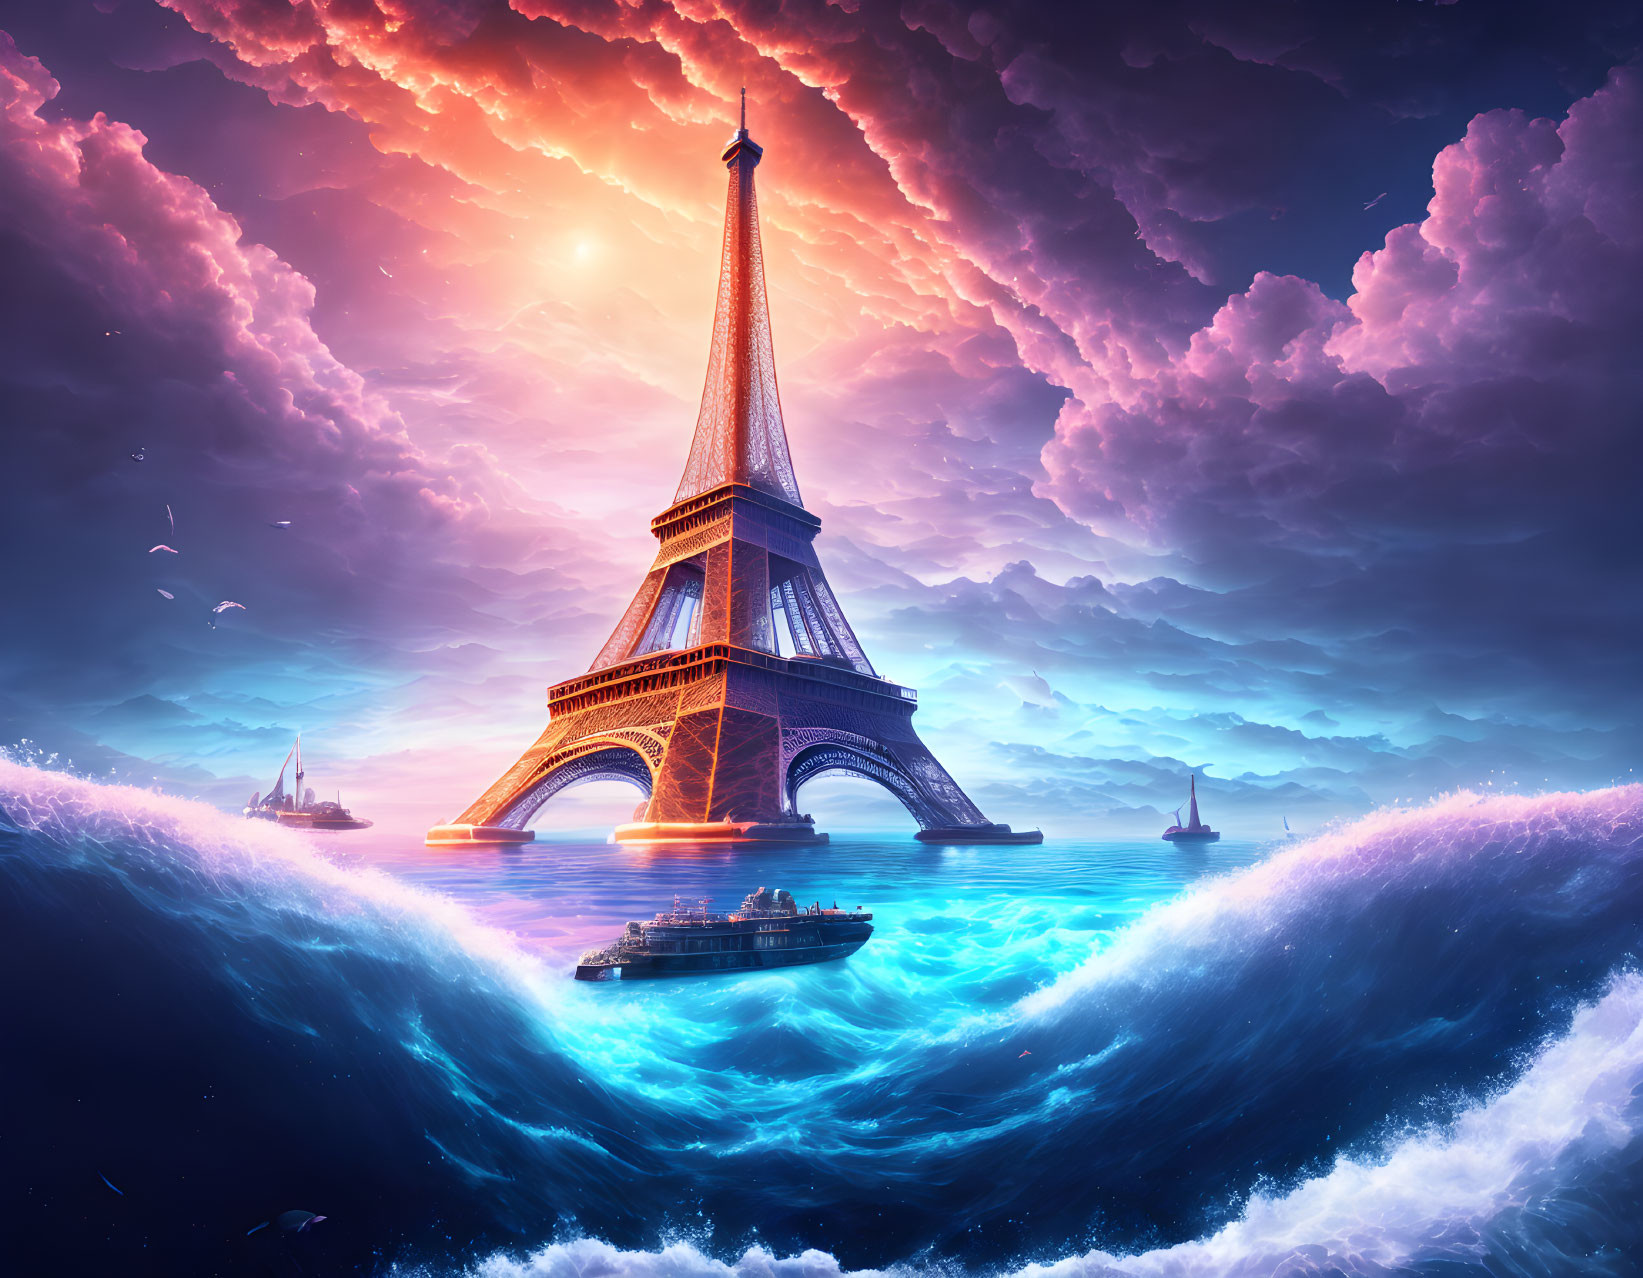 Iconic Eiffel Tower in surreal landscape with pink clouds and blue waters